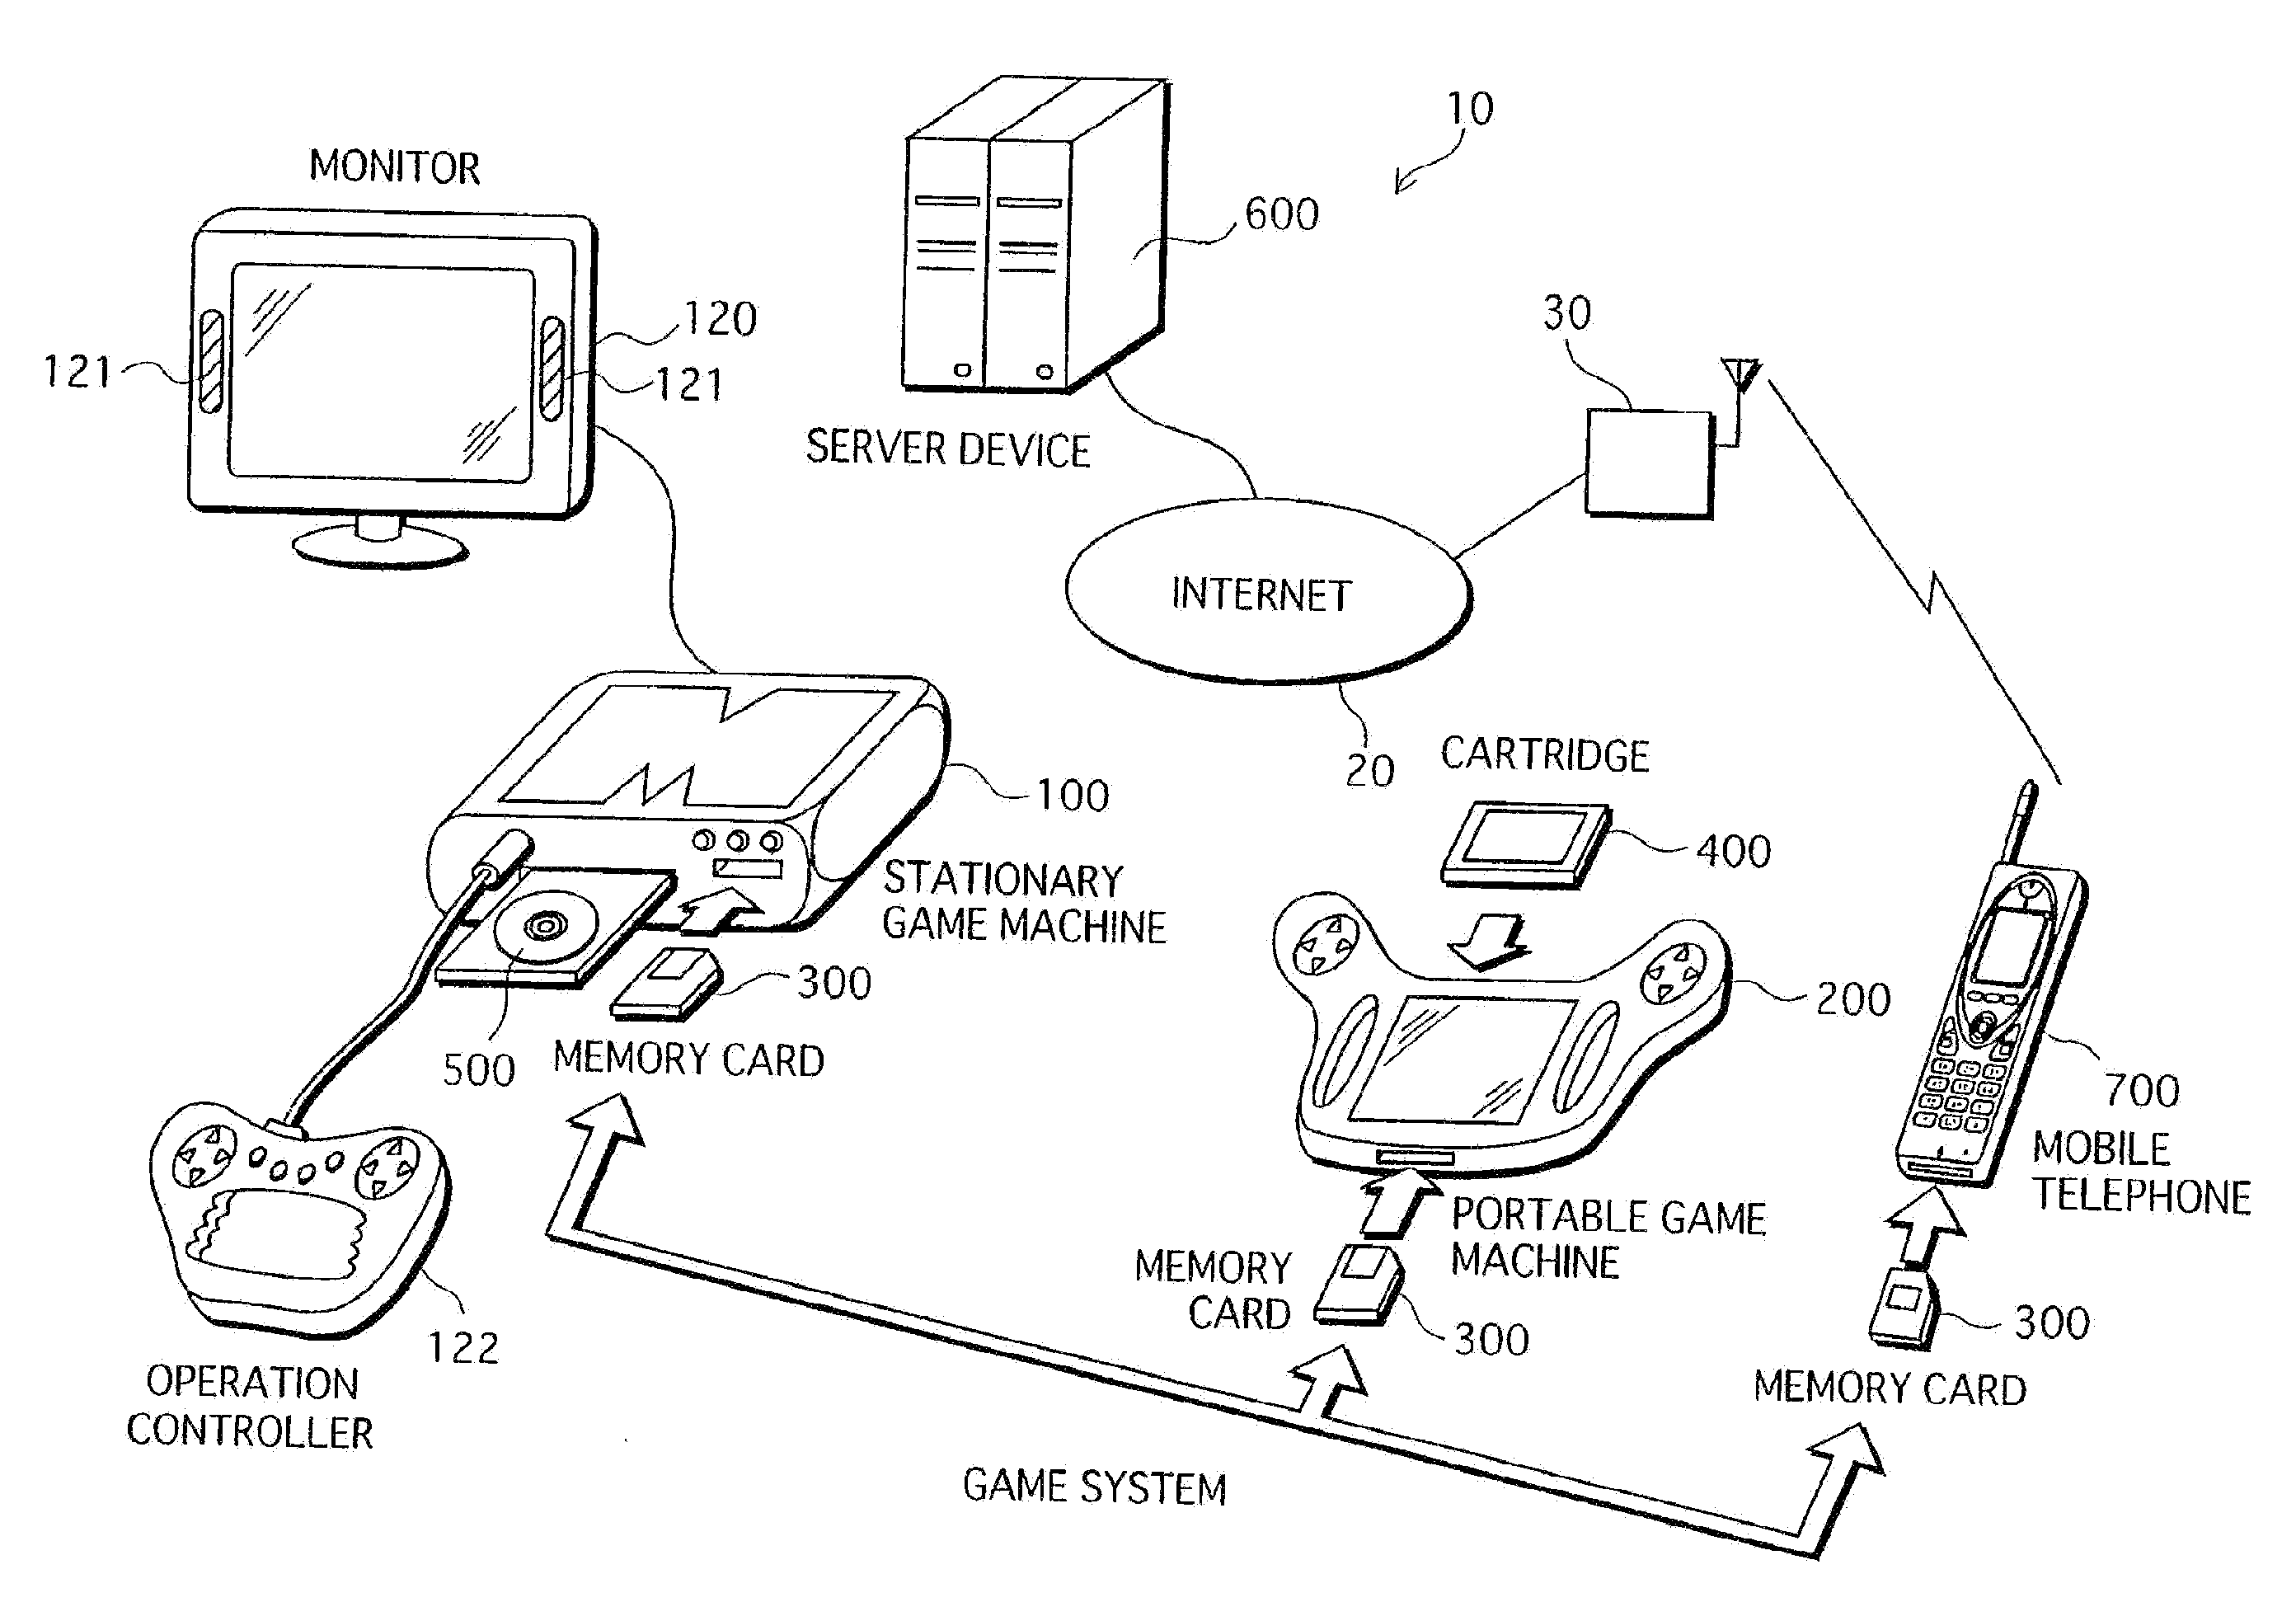 Game system, game execution apparatus, and portable storage medium